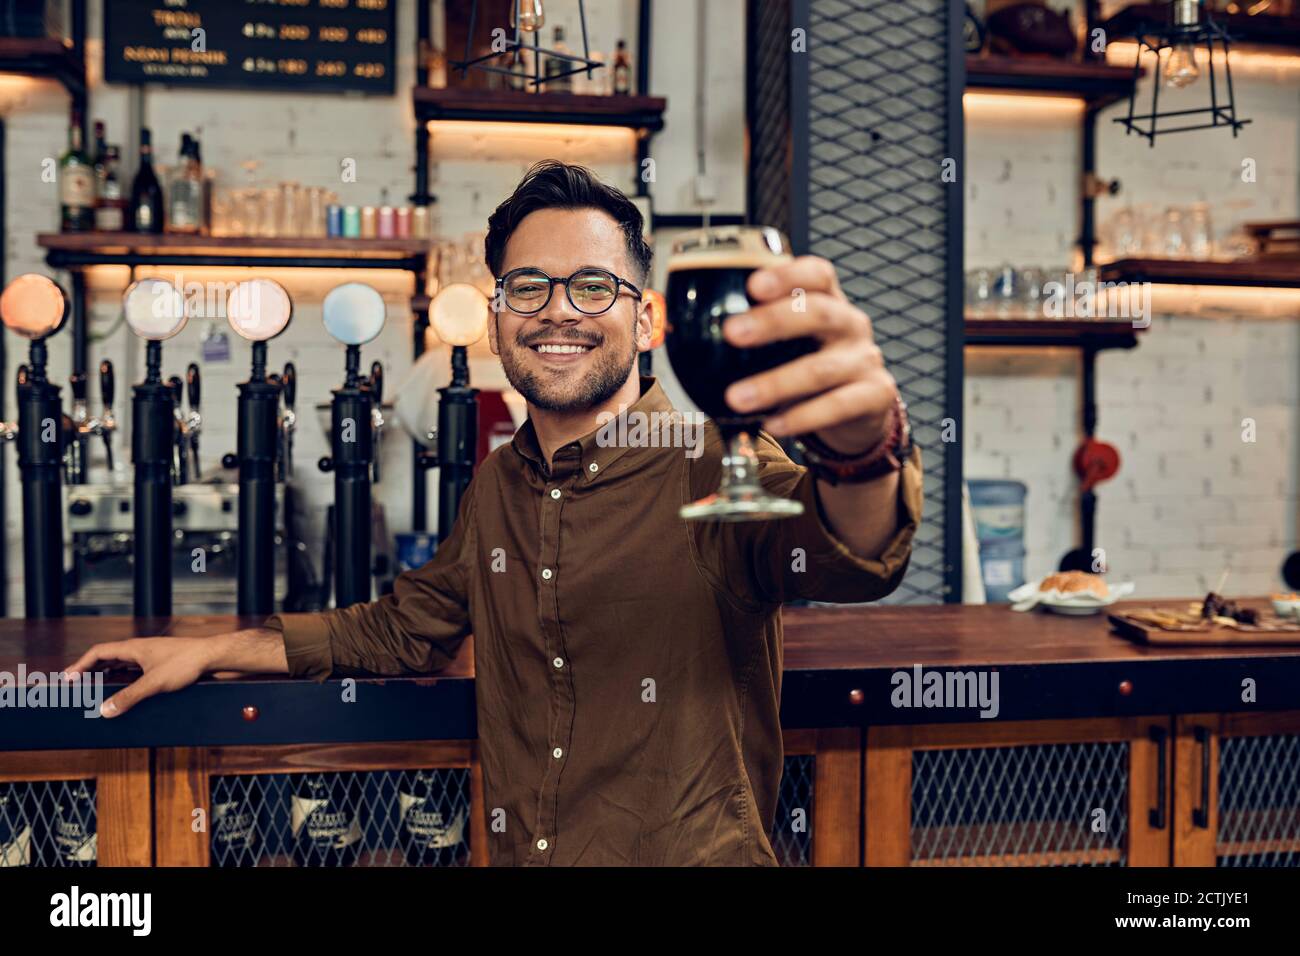 Portrait of a smiling man raising his beer glass in a pub Stock Photo